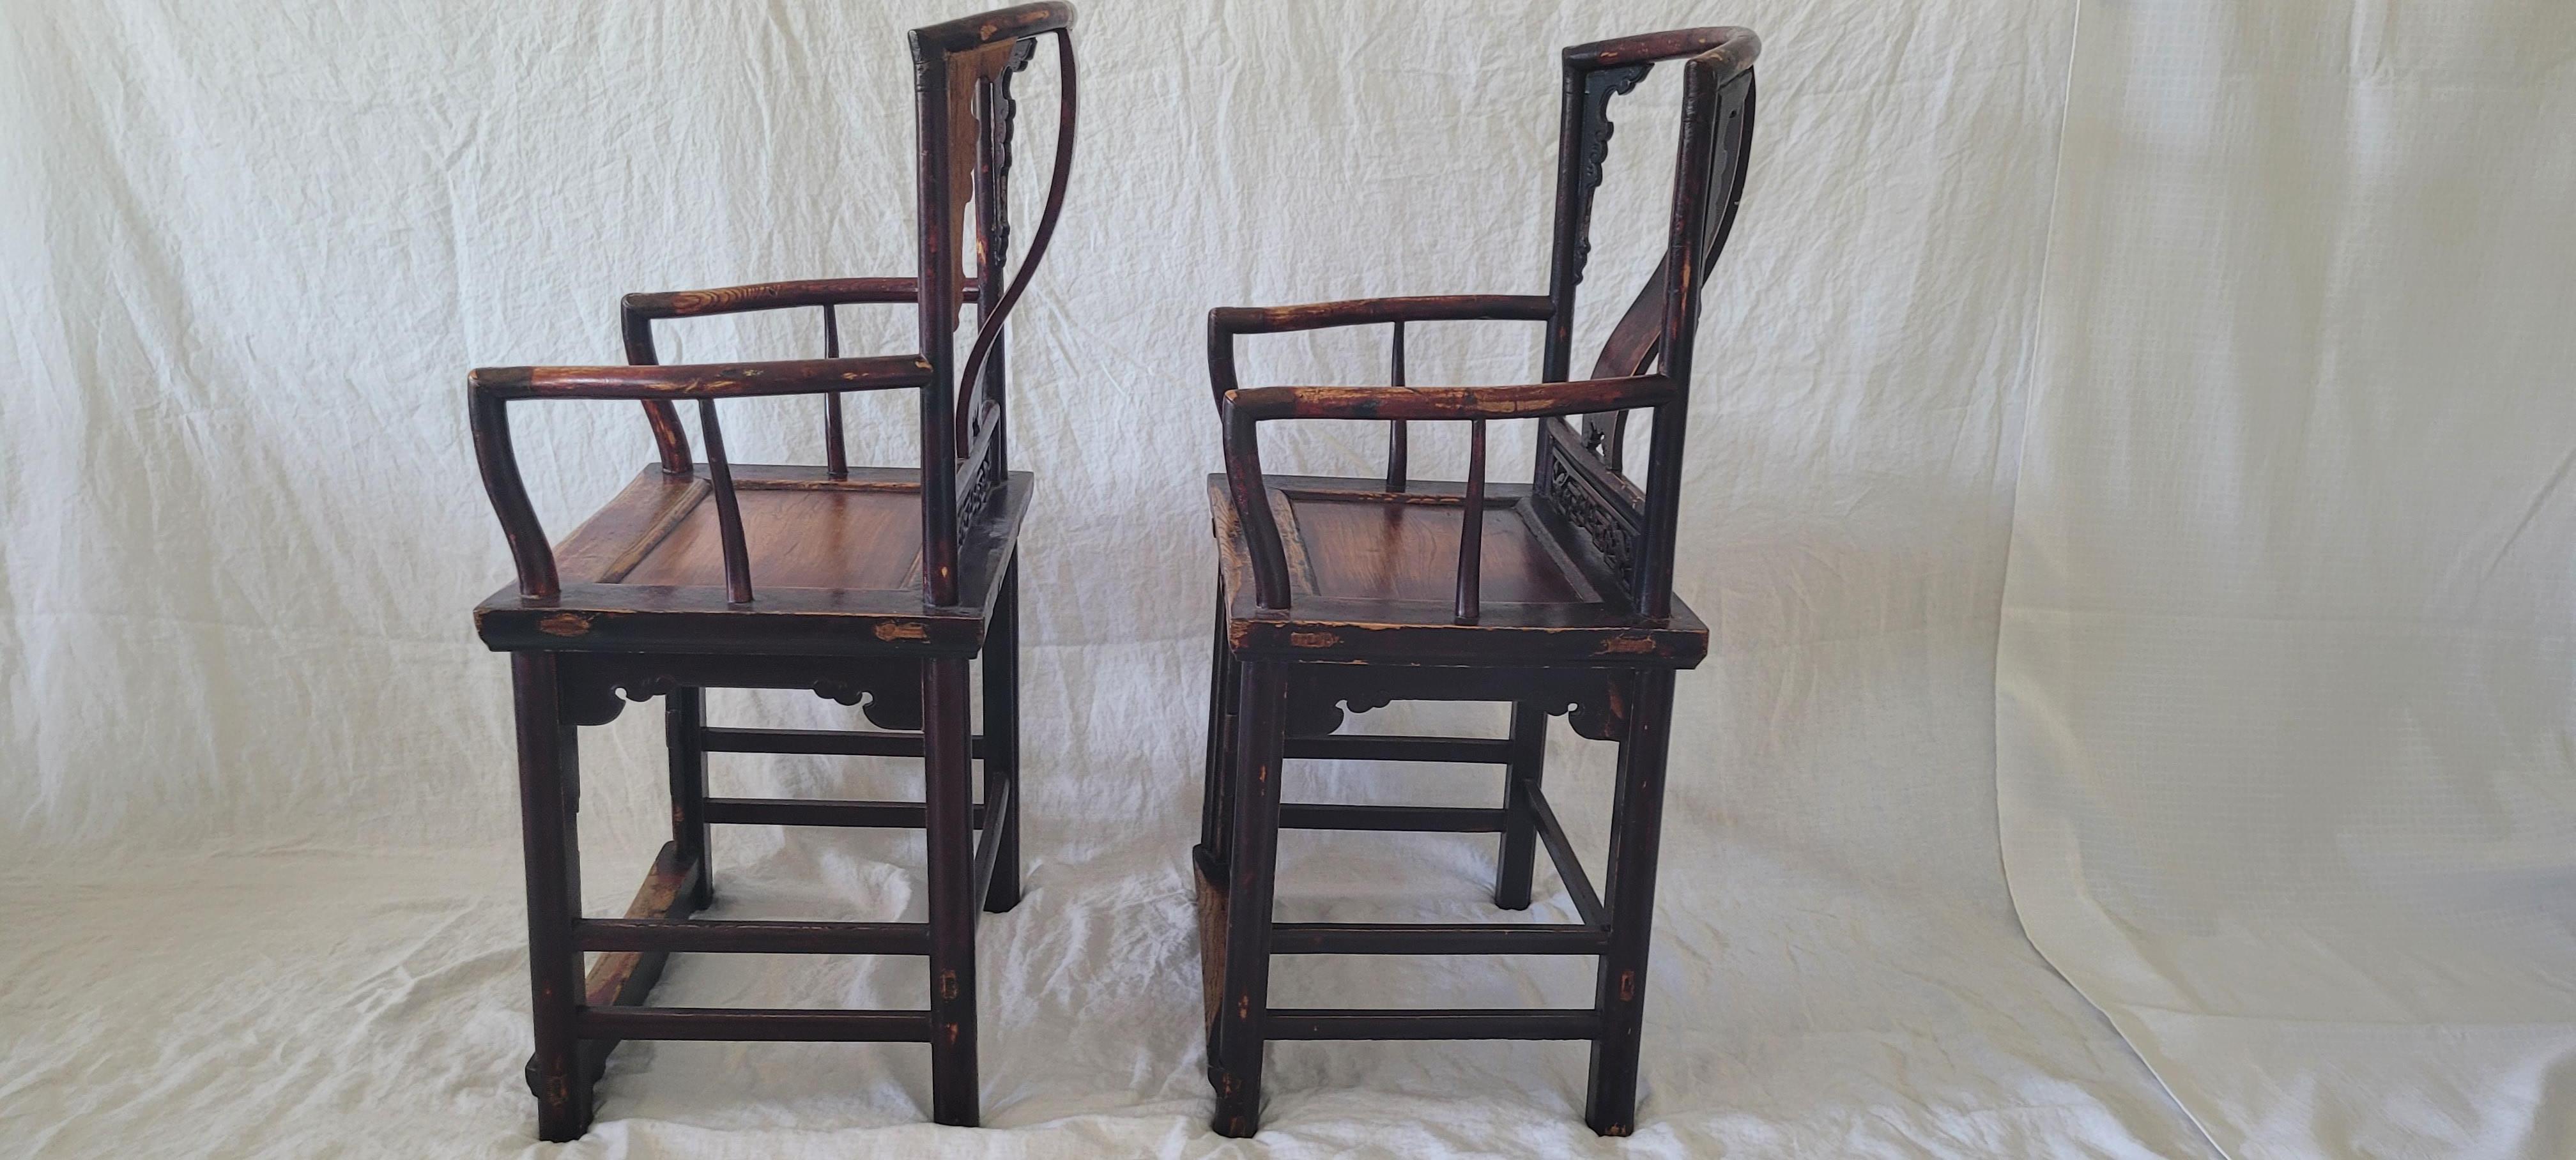 Pair of  Southern Official’s Hat Armchairs	41h x 22w x 17d
This style of chair is also called “Wen Yi” which literally means scholars chairs.  The main feature of this pair is a high seat indicating that this pair had once a foot rest to go along